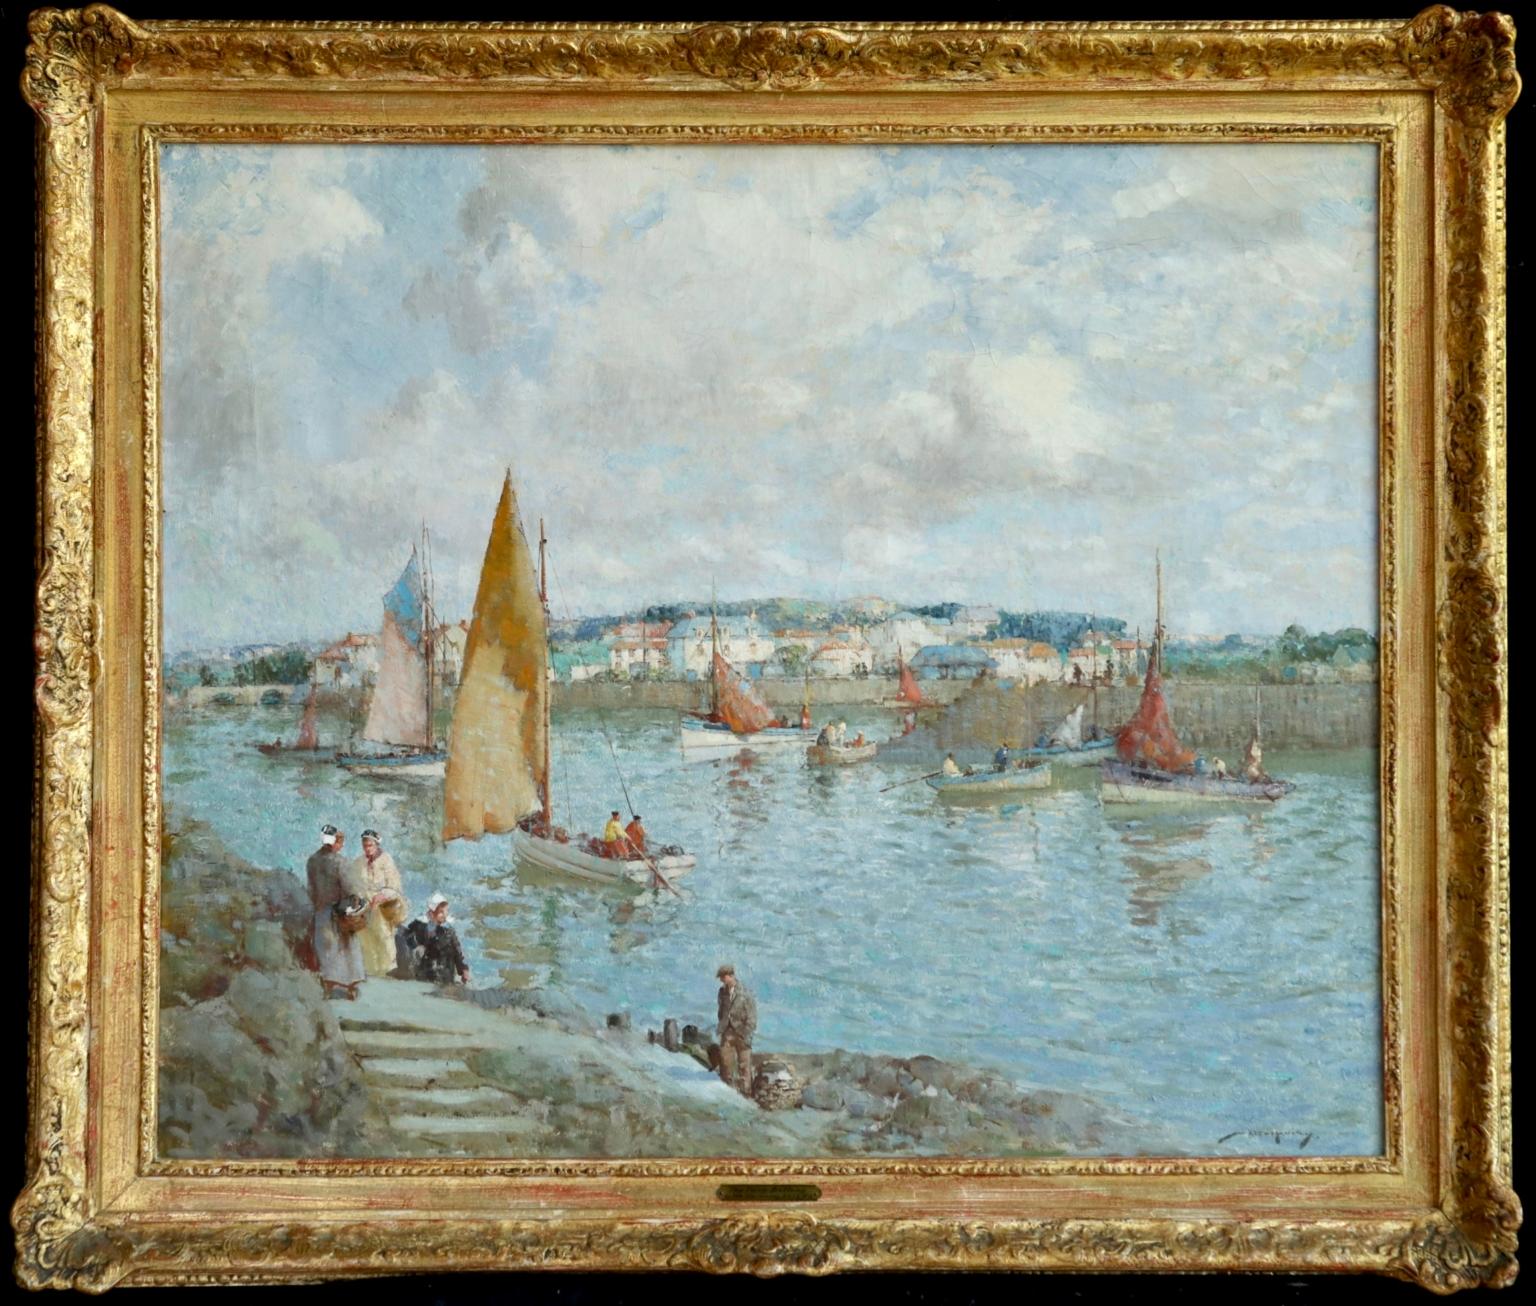 A wonderful oil on canvas circa 1925 by British painter William Lee Hankey depicting boats on a river, with figures on the banks in the foreground. Signed lower right and signed & dated verso.

Dimensions:
Framed: 30